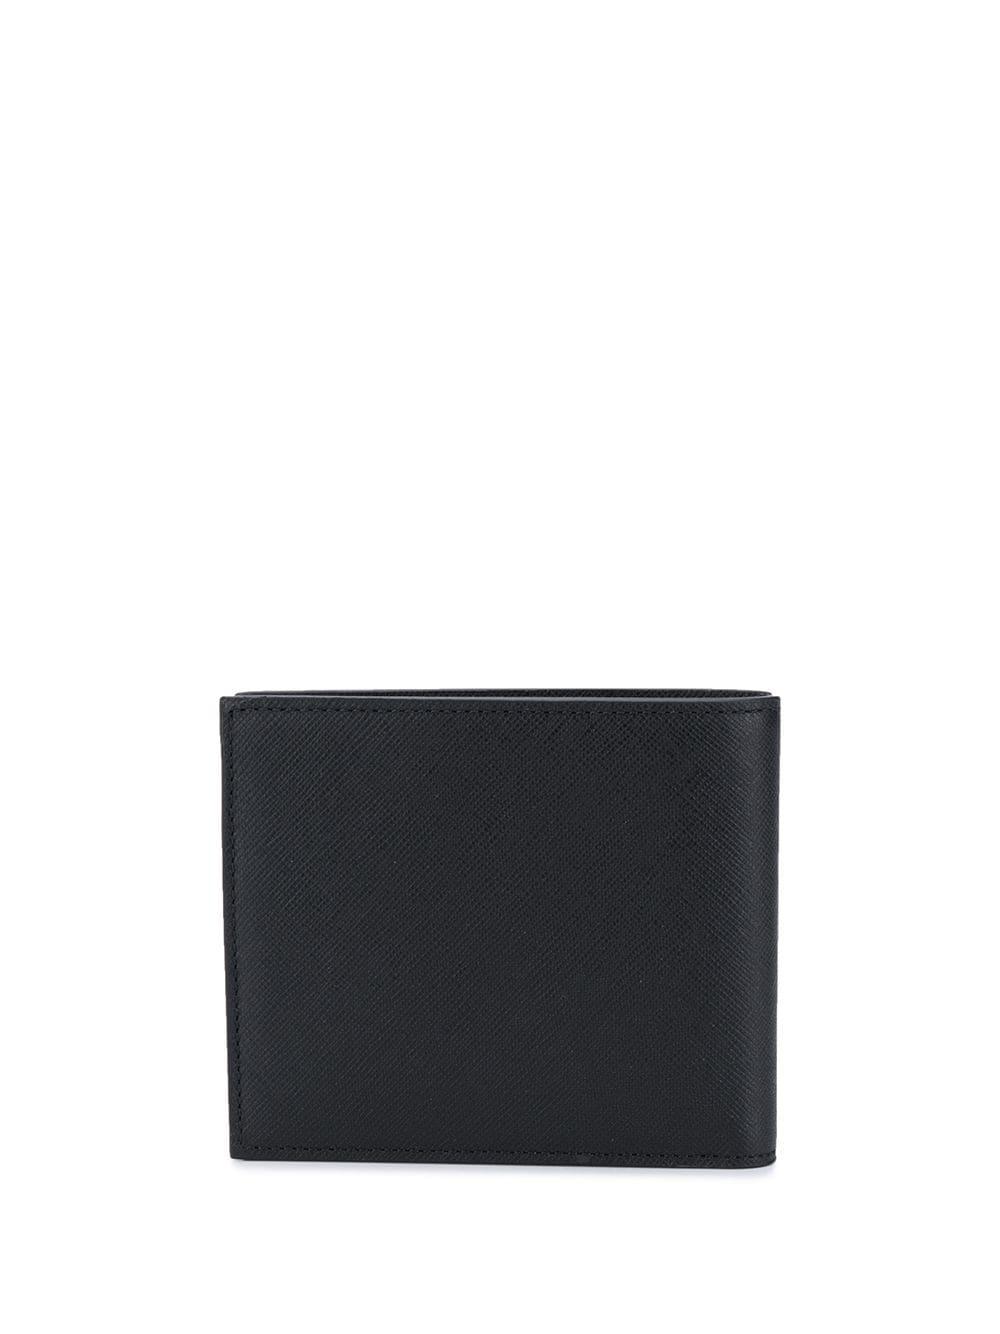 Paul Smith Graphic-print Leather Billfold Wallet in Black for Men | Lyst